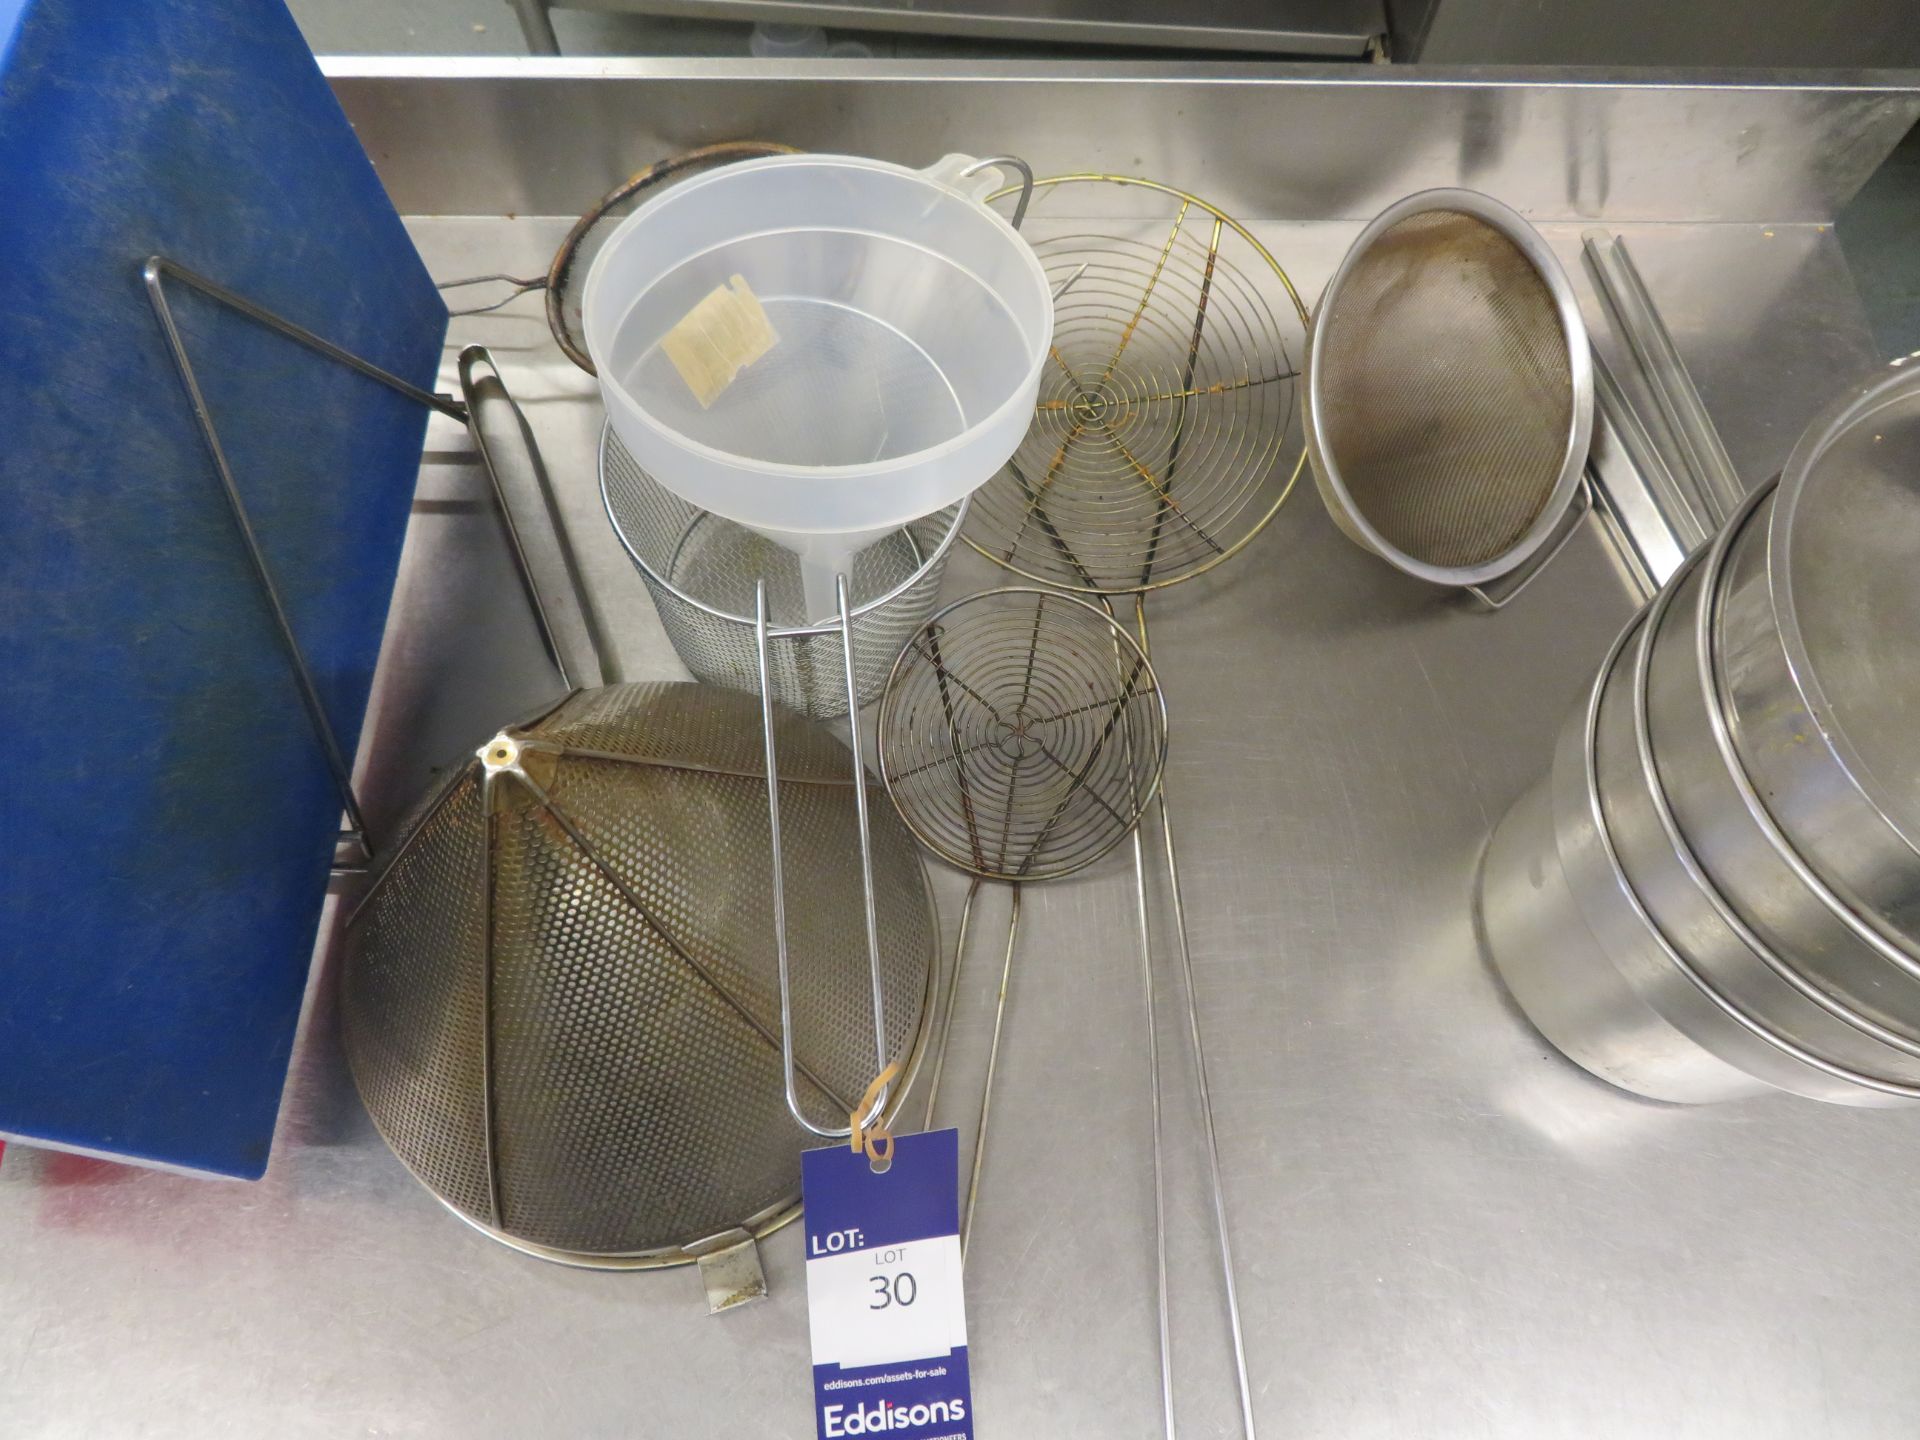 3 x Chopping Boards, Sieves and Bain-Marie Pots - Image 3 of 3